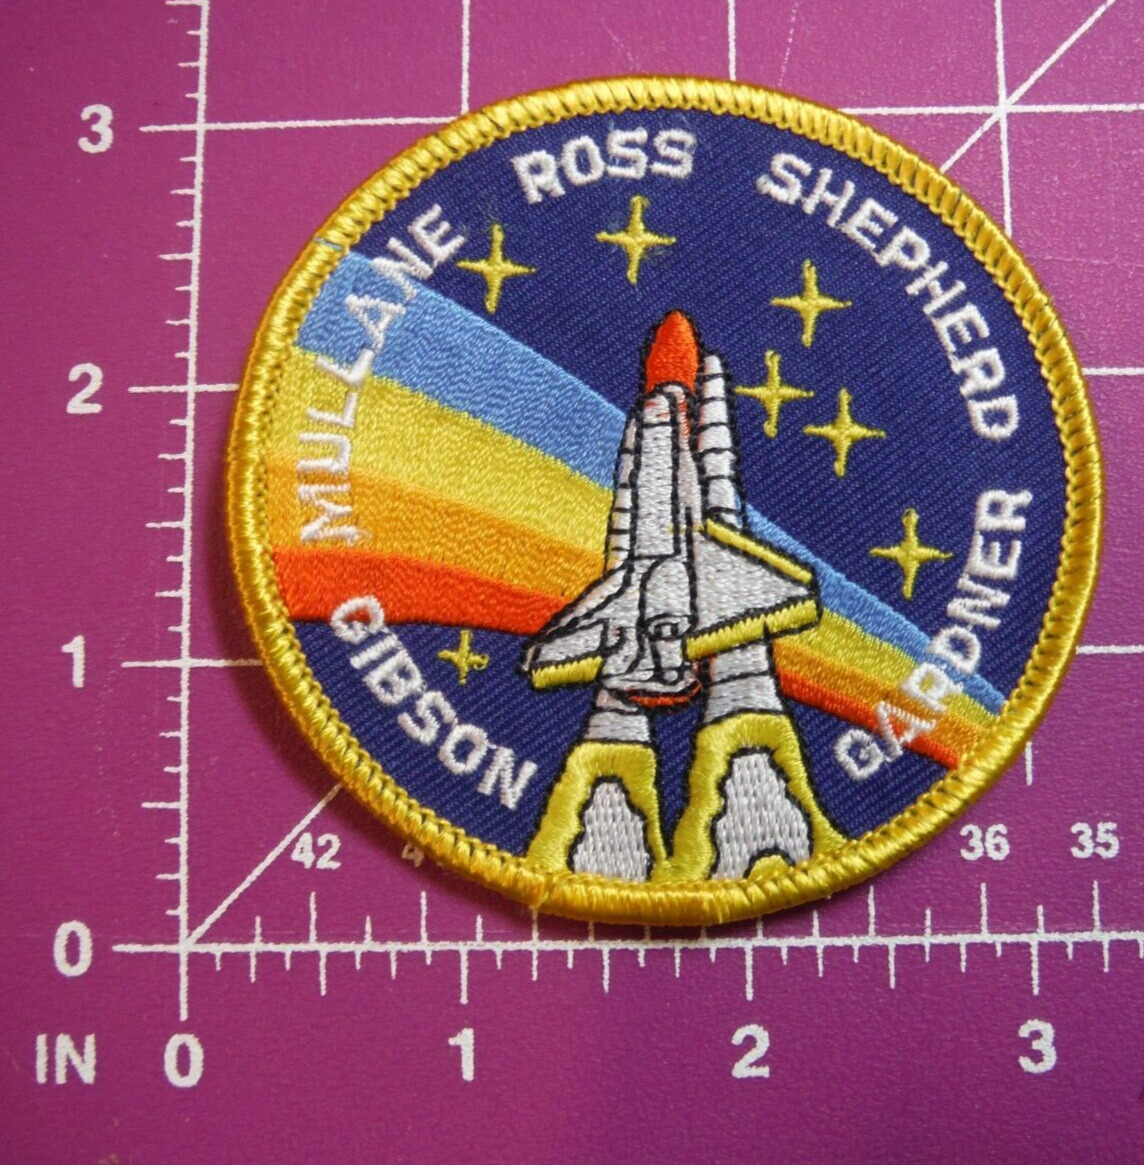 NASA STS-27 SPACE SHUTTLE MISSION patch